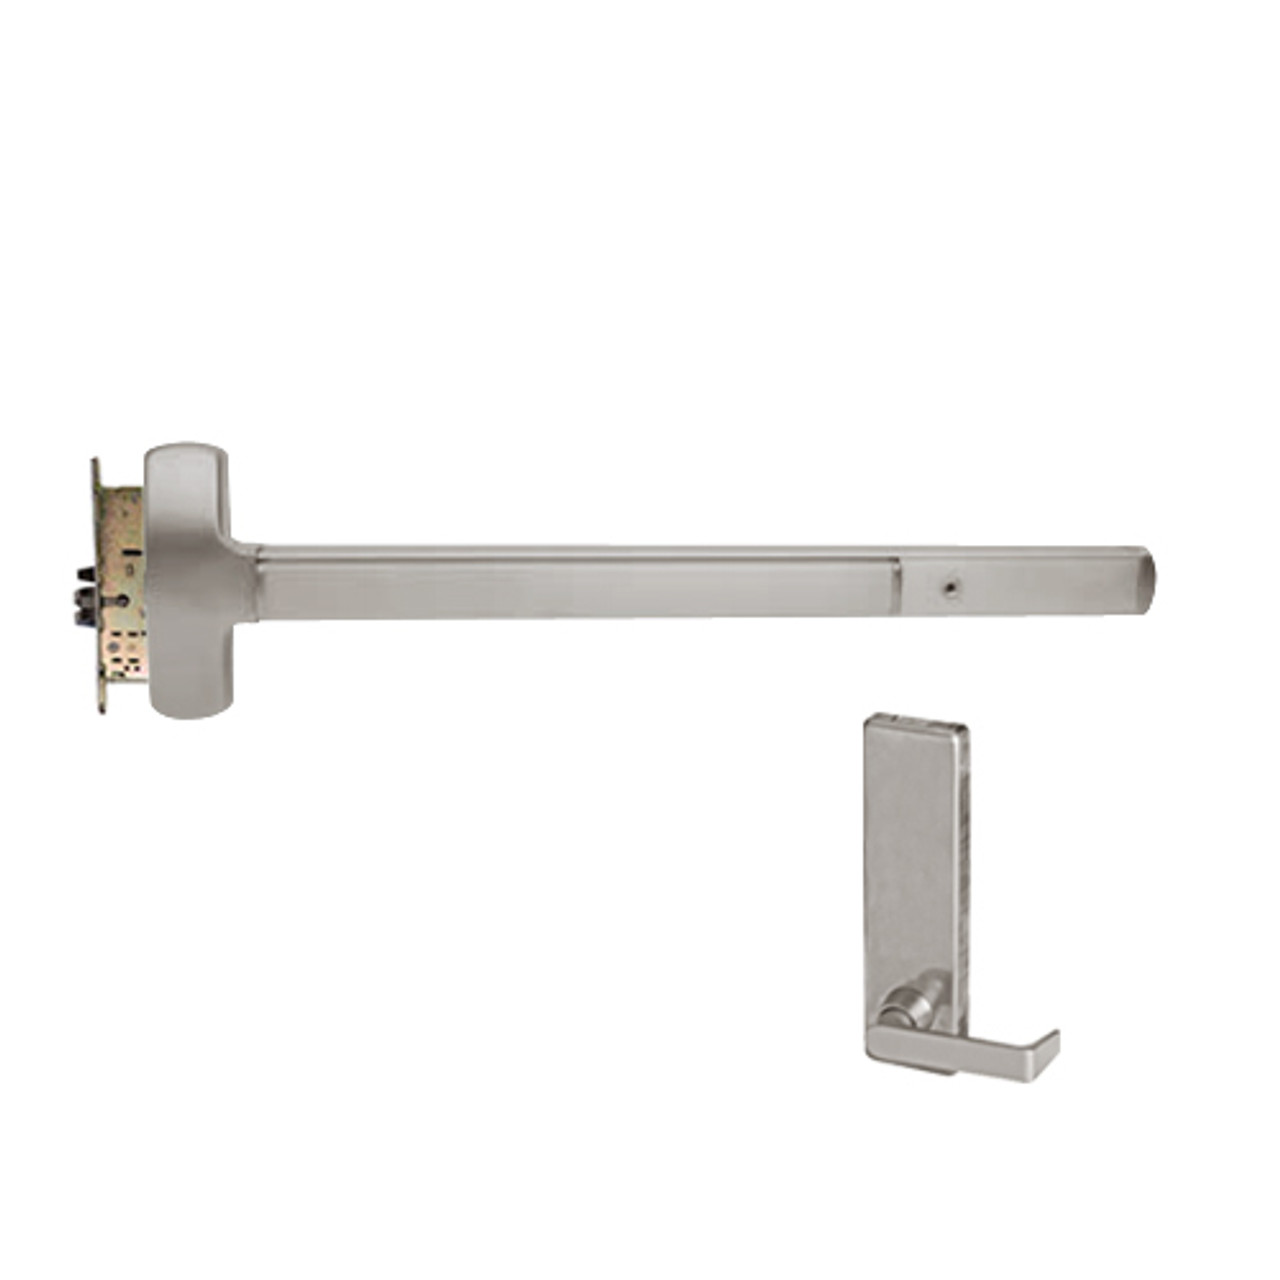 25-M-L-DT-DANE-US32D-4-RHR Falcon Exit Device in Satin Stainless Steel